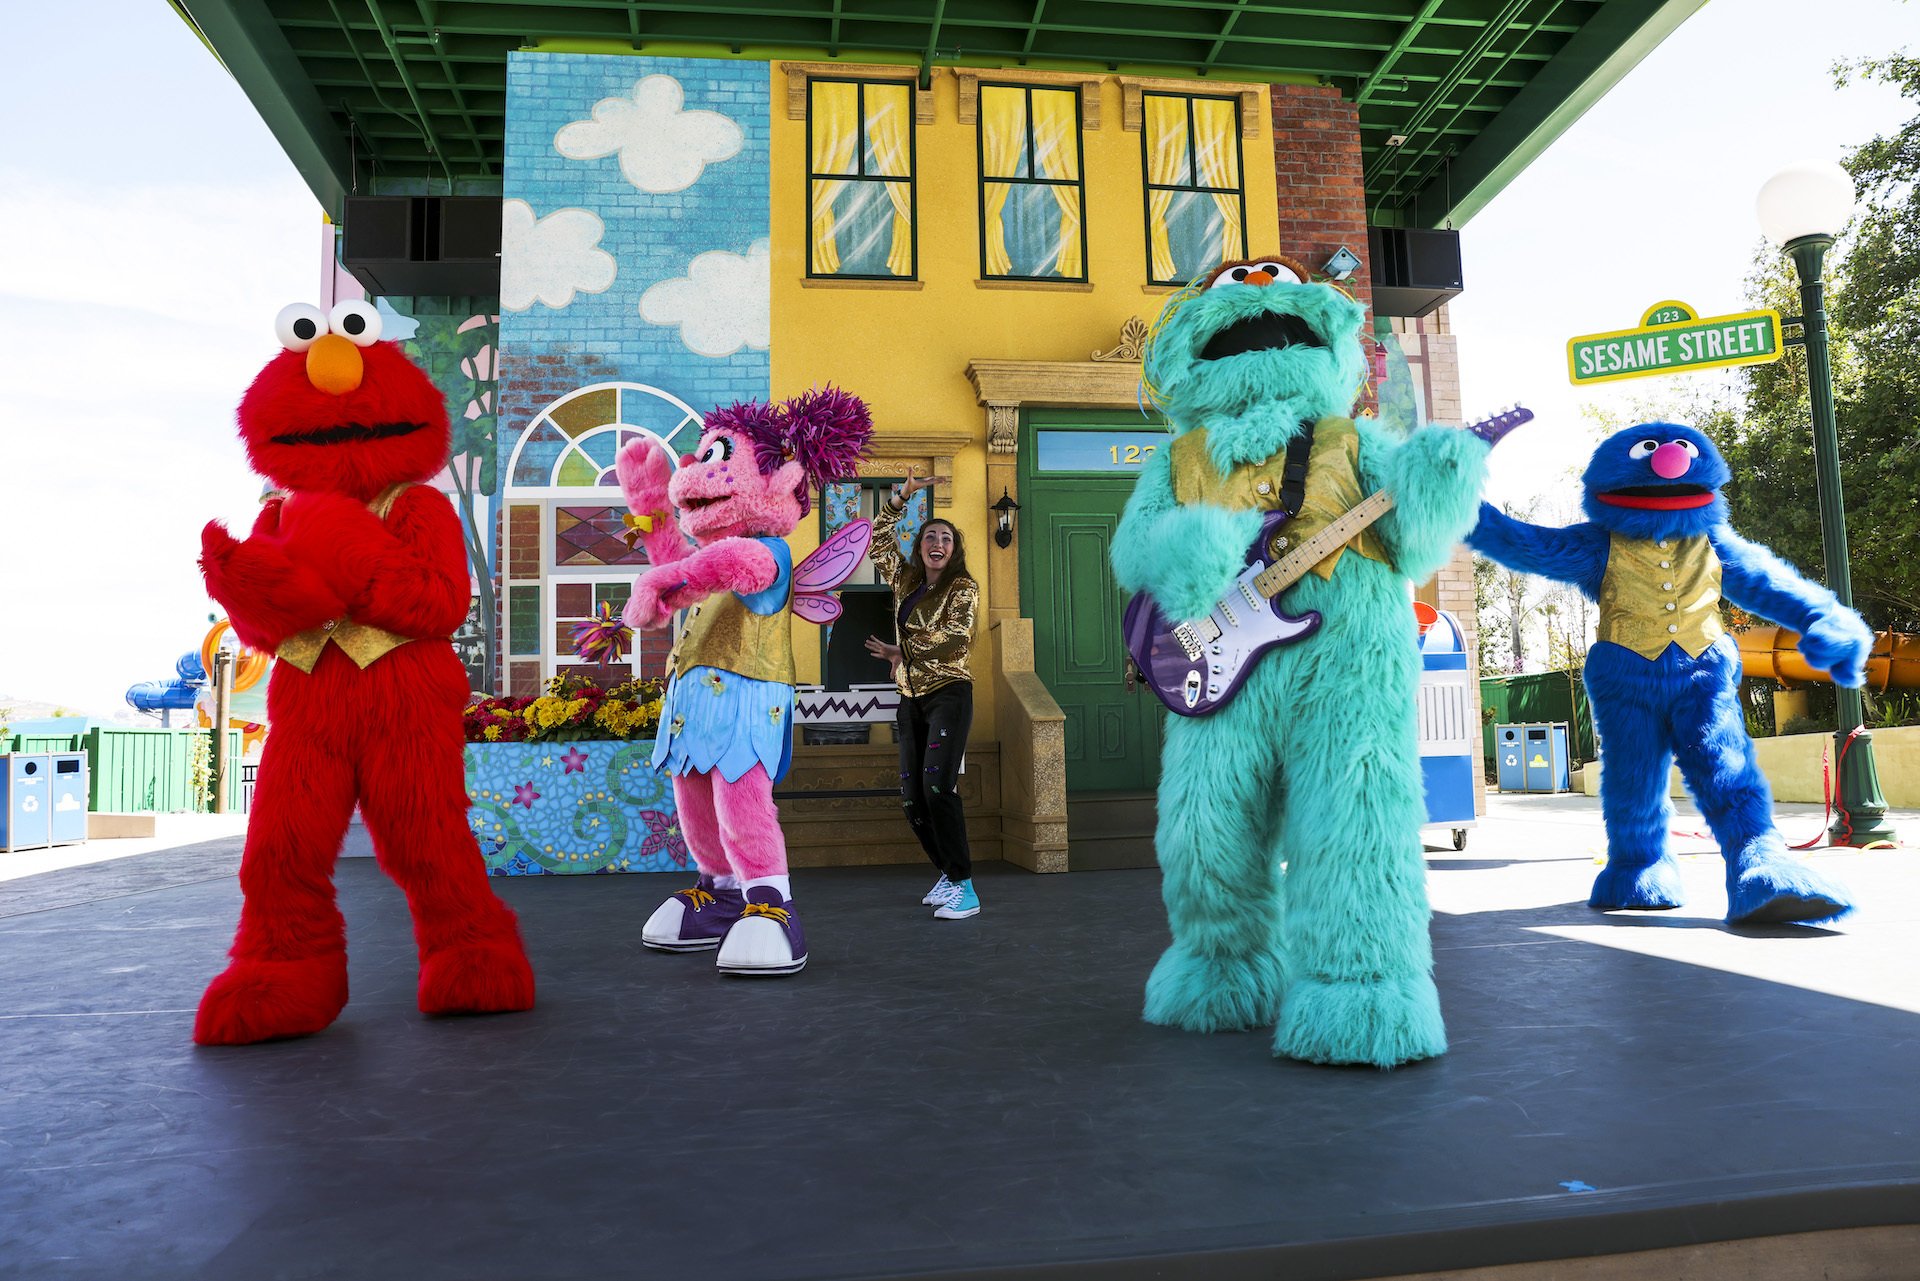 Popular Sesame Street characters dance on stage at a Sesame Place theme Park.